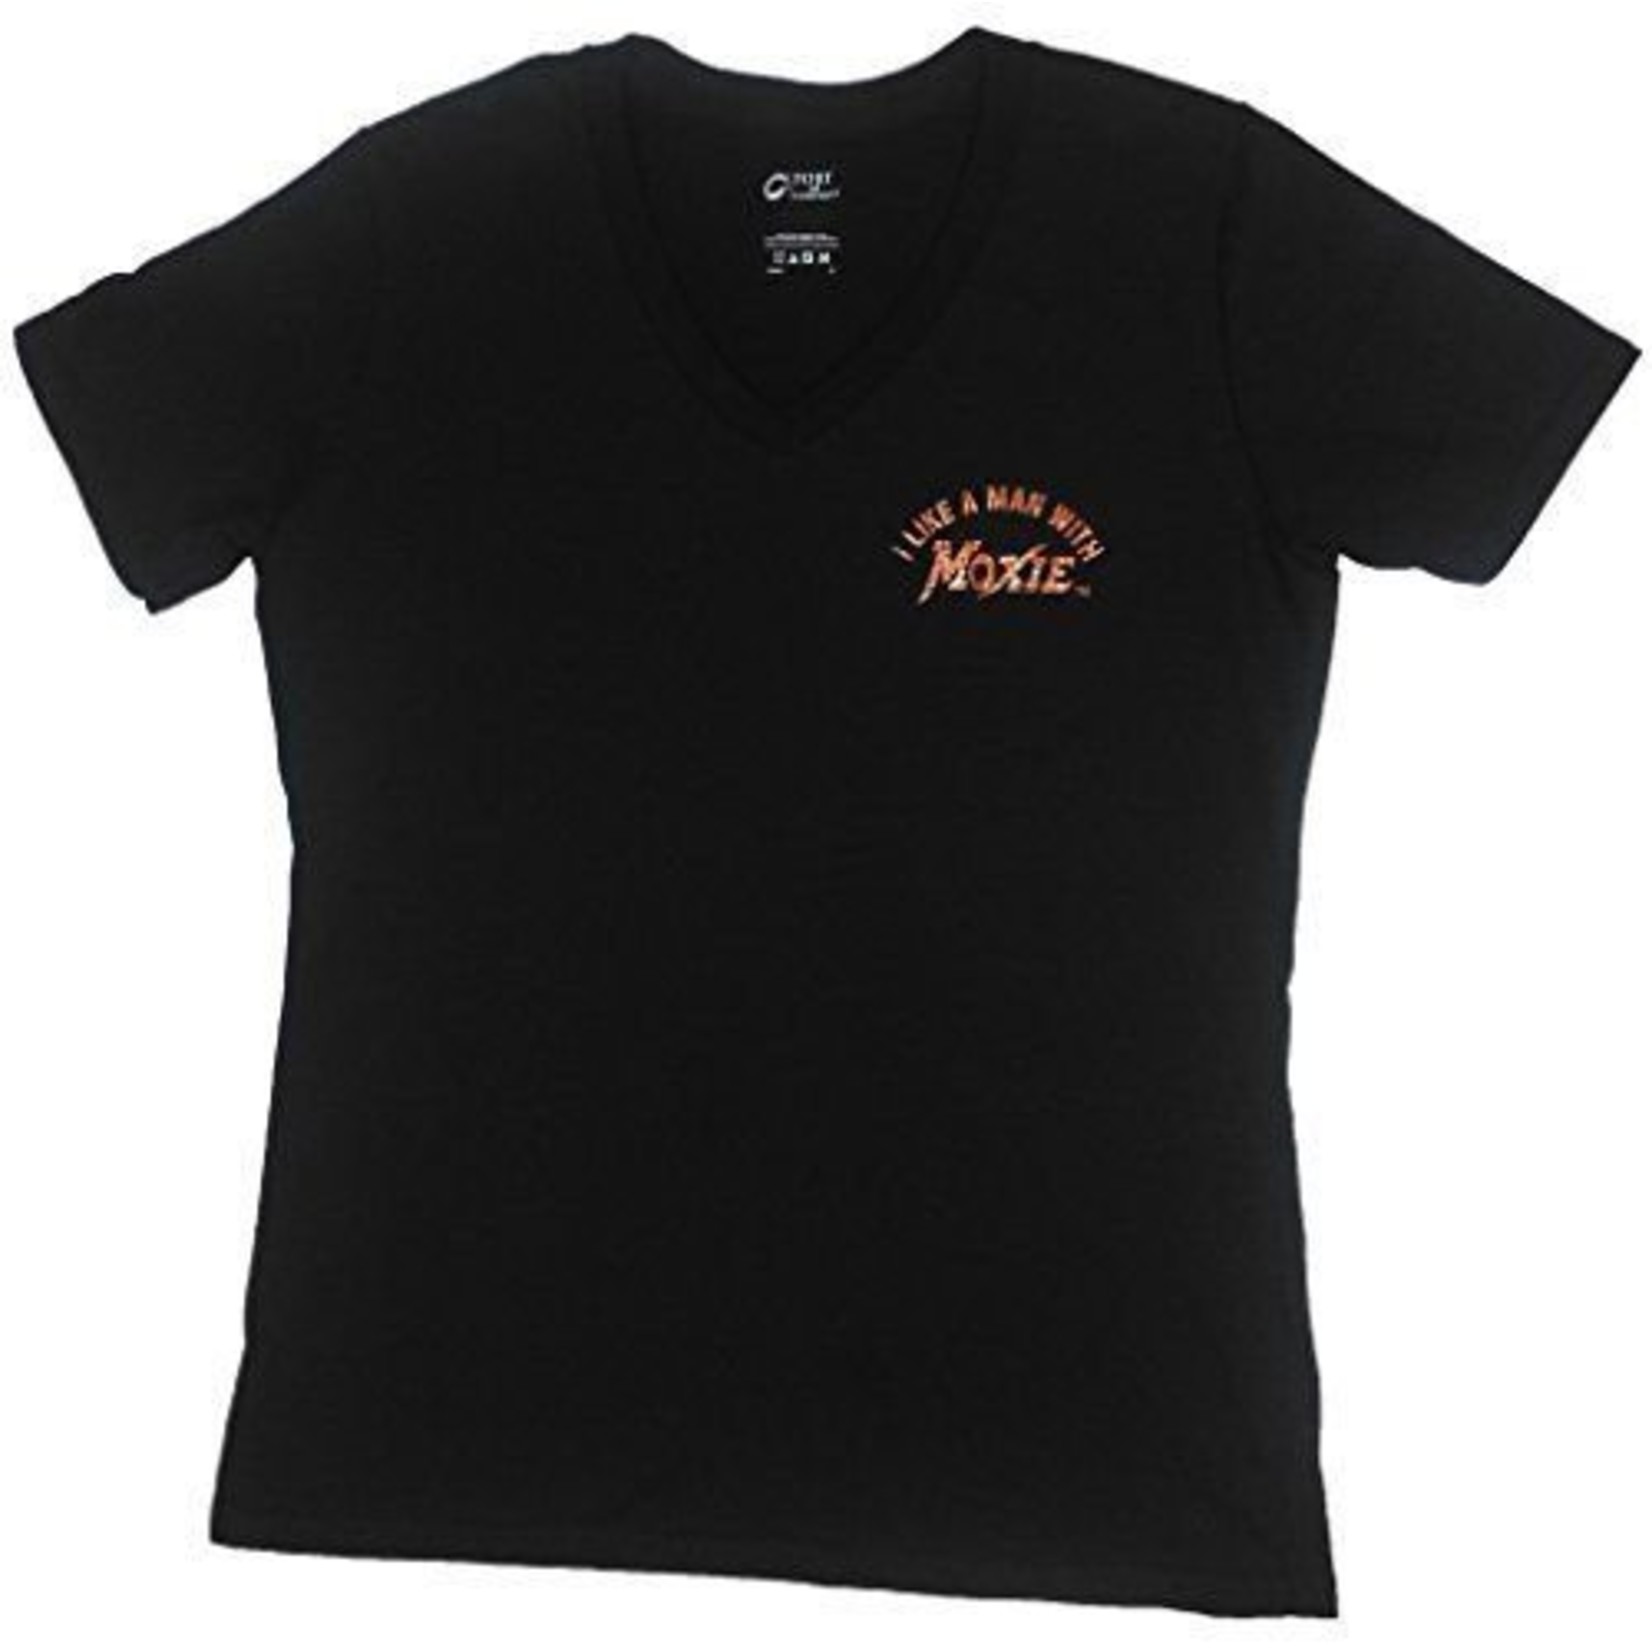 I Like a Man with Moxie Ladies Tee - Discontinued